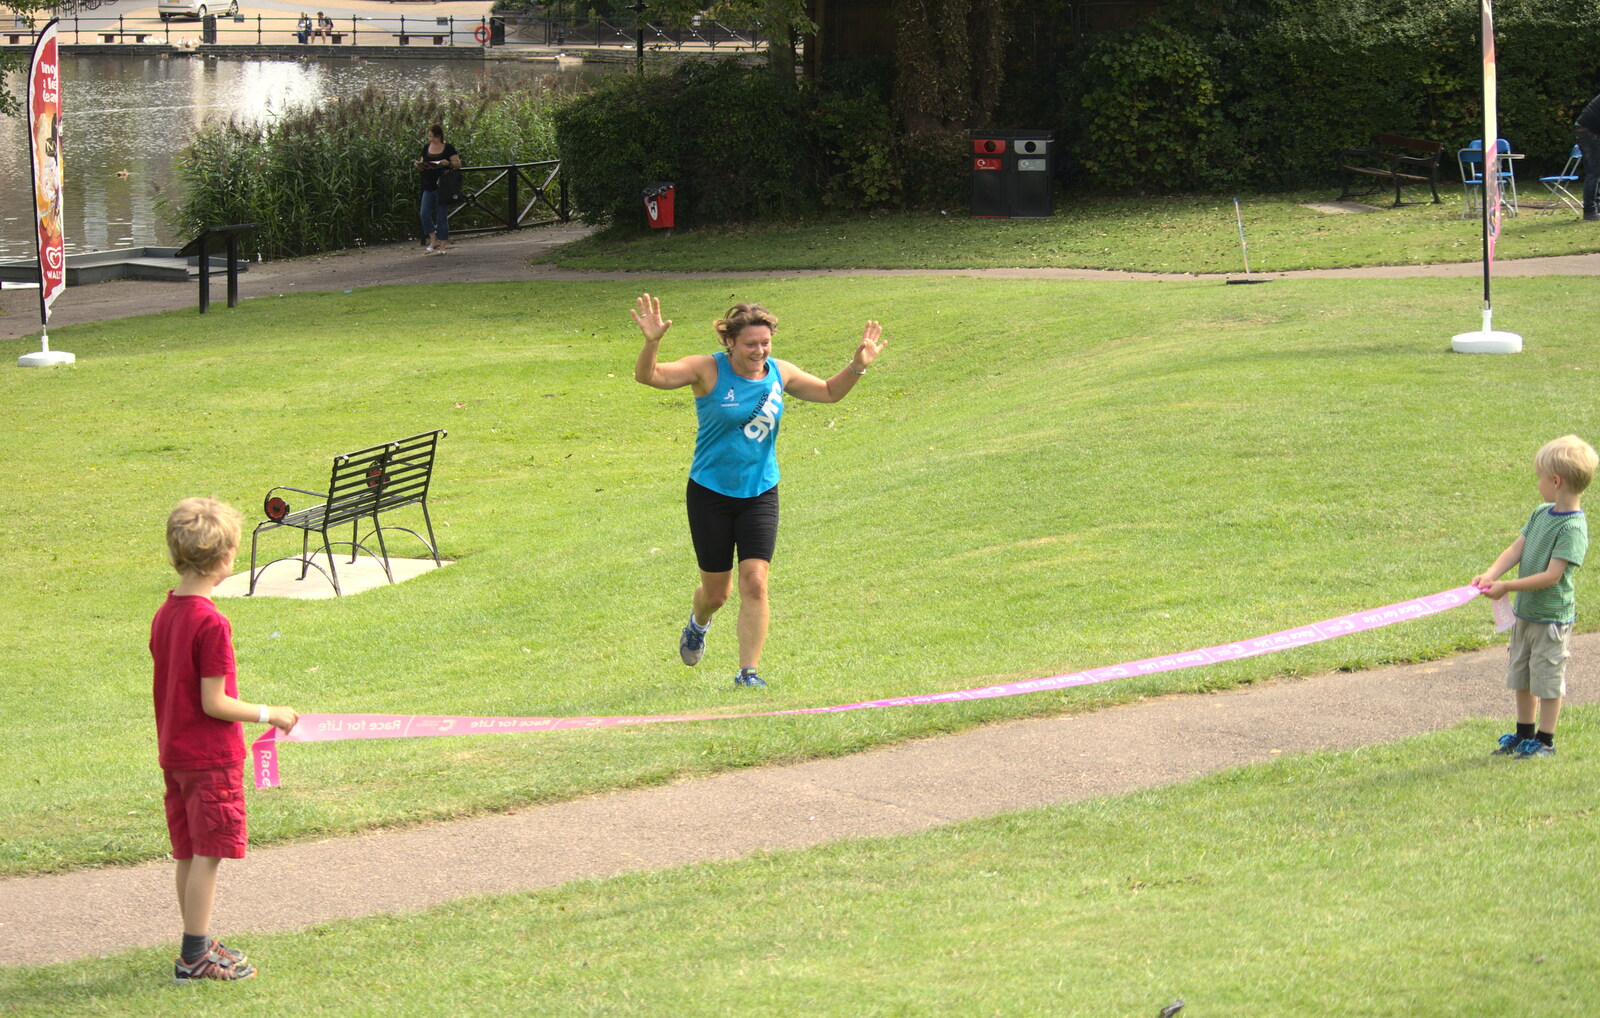 The first runner comes in from A Race For Life, The Park, Diss, Norfolk - 16th August 2015